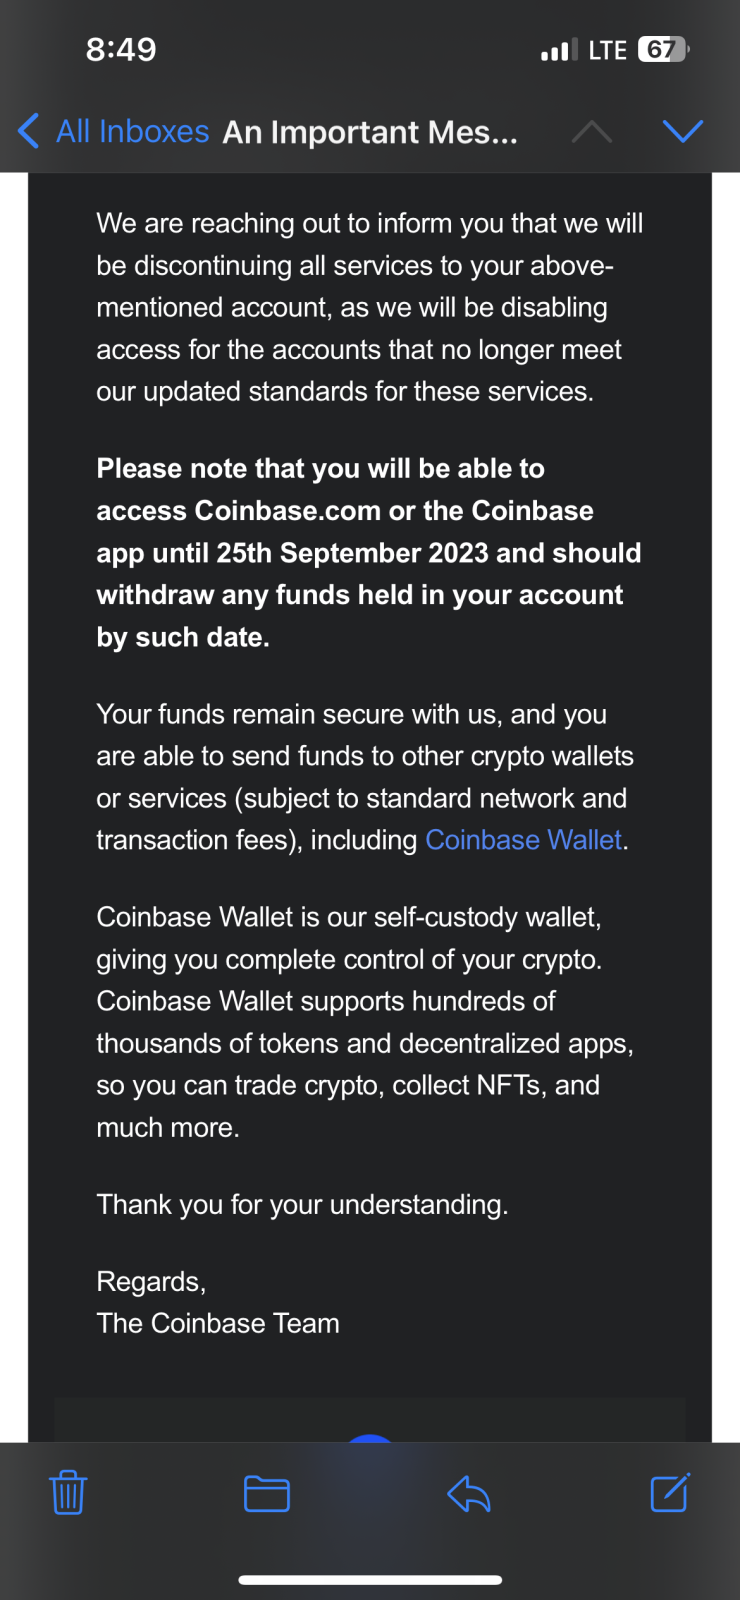 Anyway to get my money from coinbase wallet? | TechEnclave - Indian Technology Community